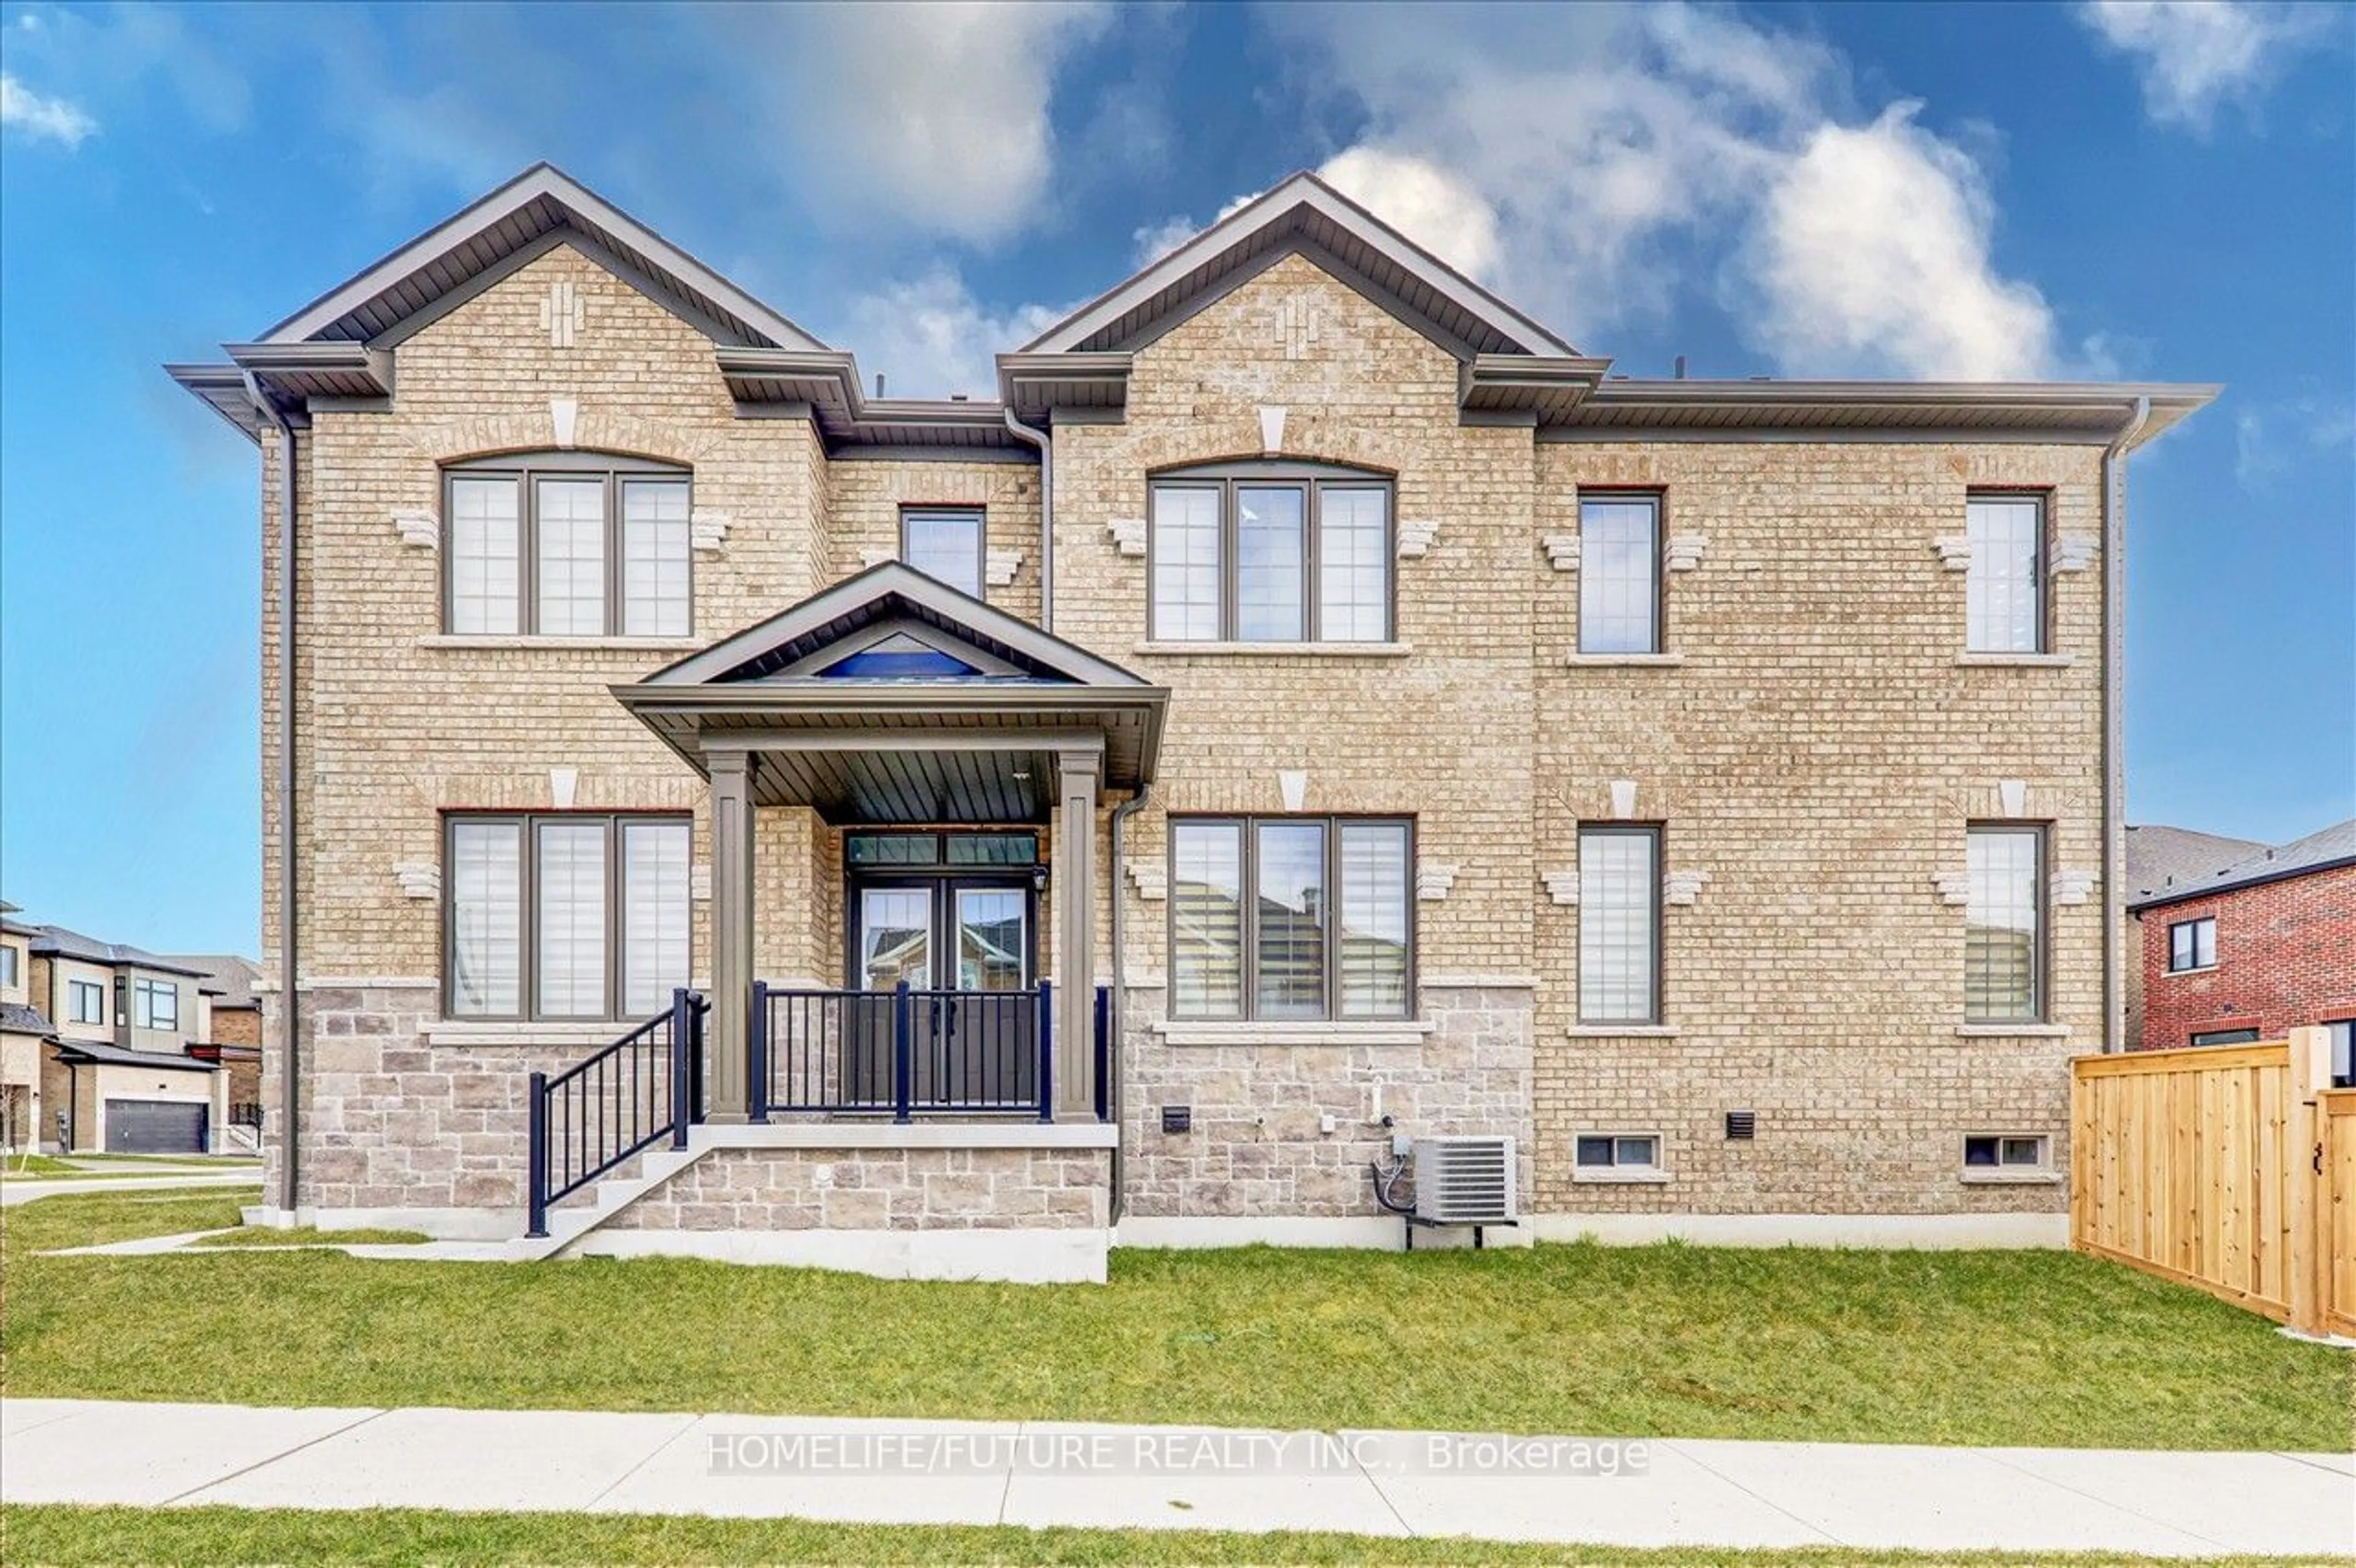 Home with brick exterior material for 235 Sunnyridge Ave, Whitchurch-Stouffville Ontario L4A 4W3